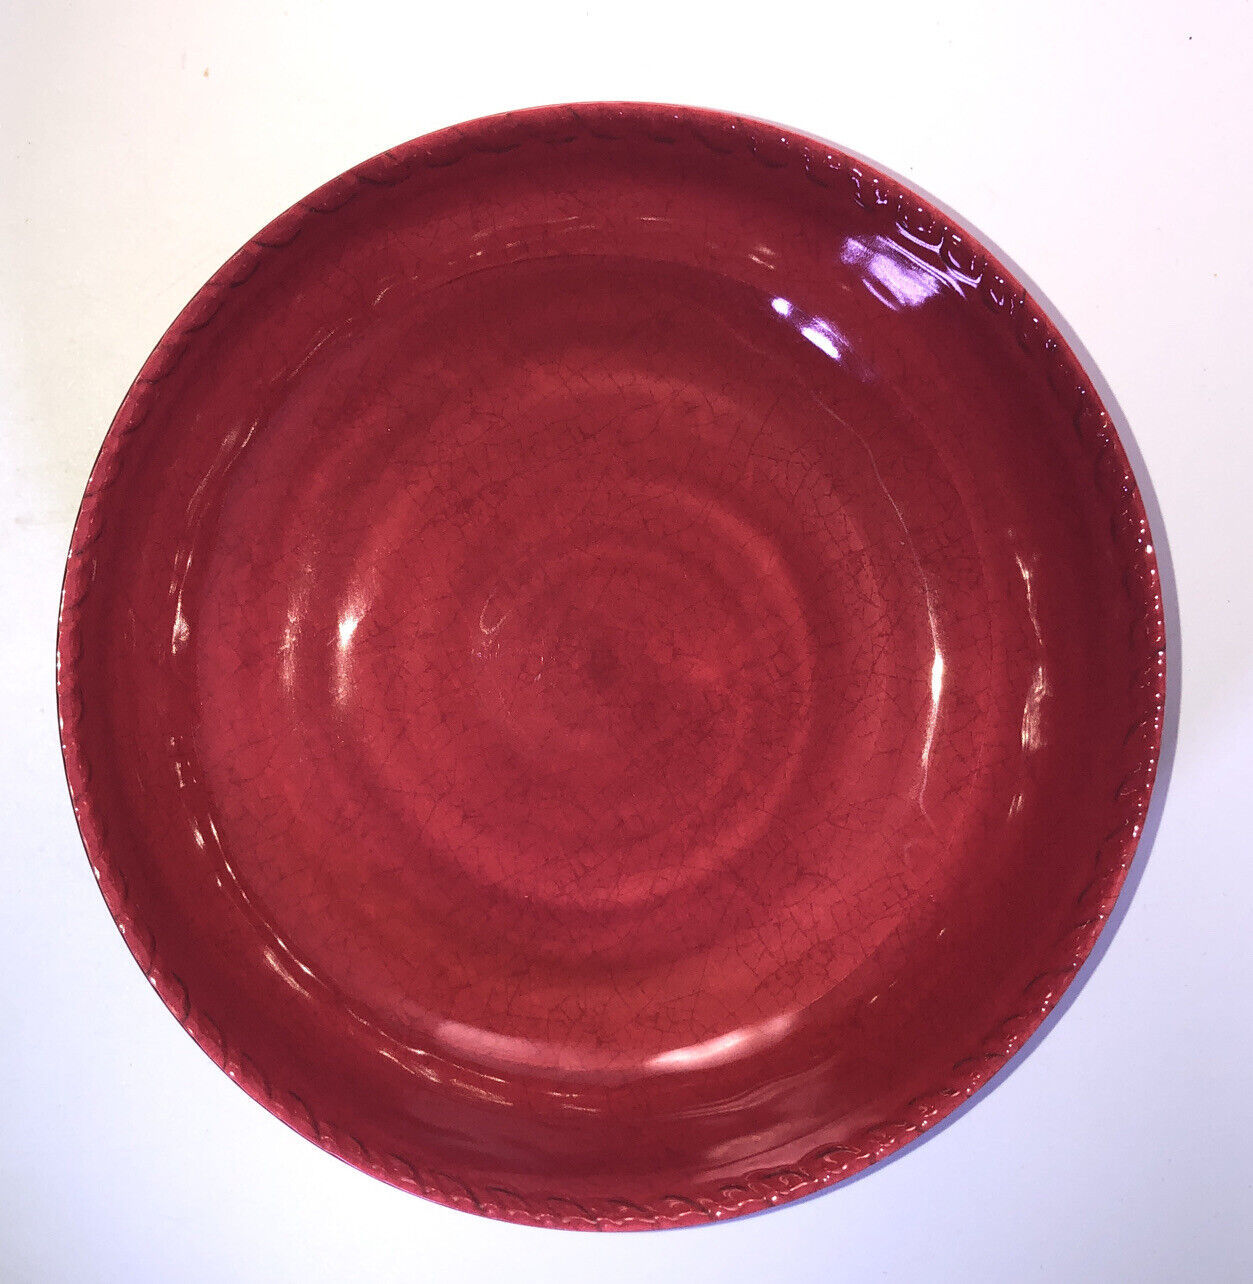 Pier 1 Imports Red/Maroon 9”W x 2 1/2”D Soup/Salad/Pasta Serving Bowl-NEW-SHIP24 - $29.58